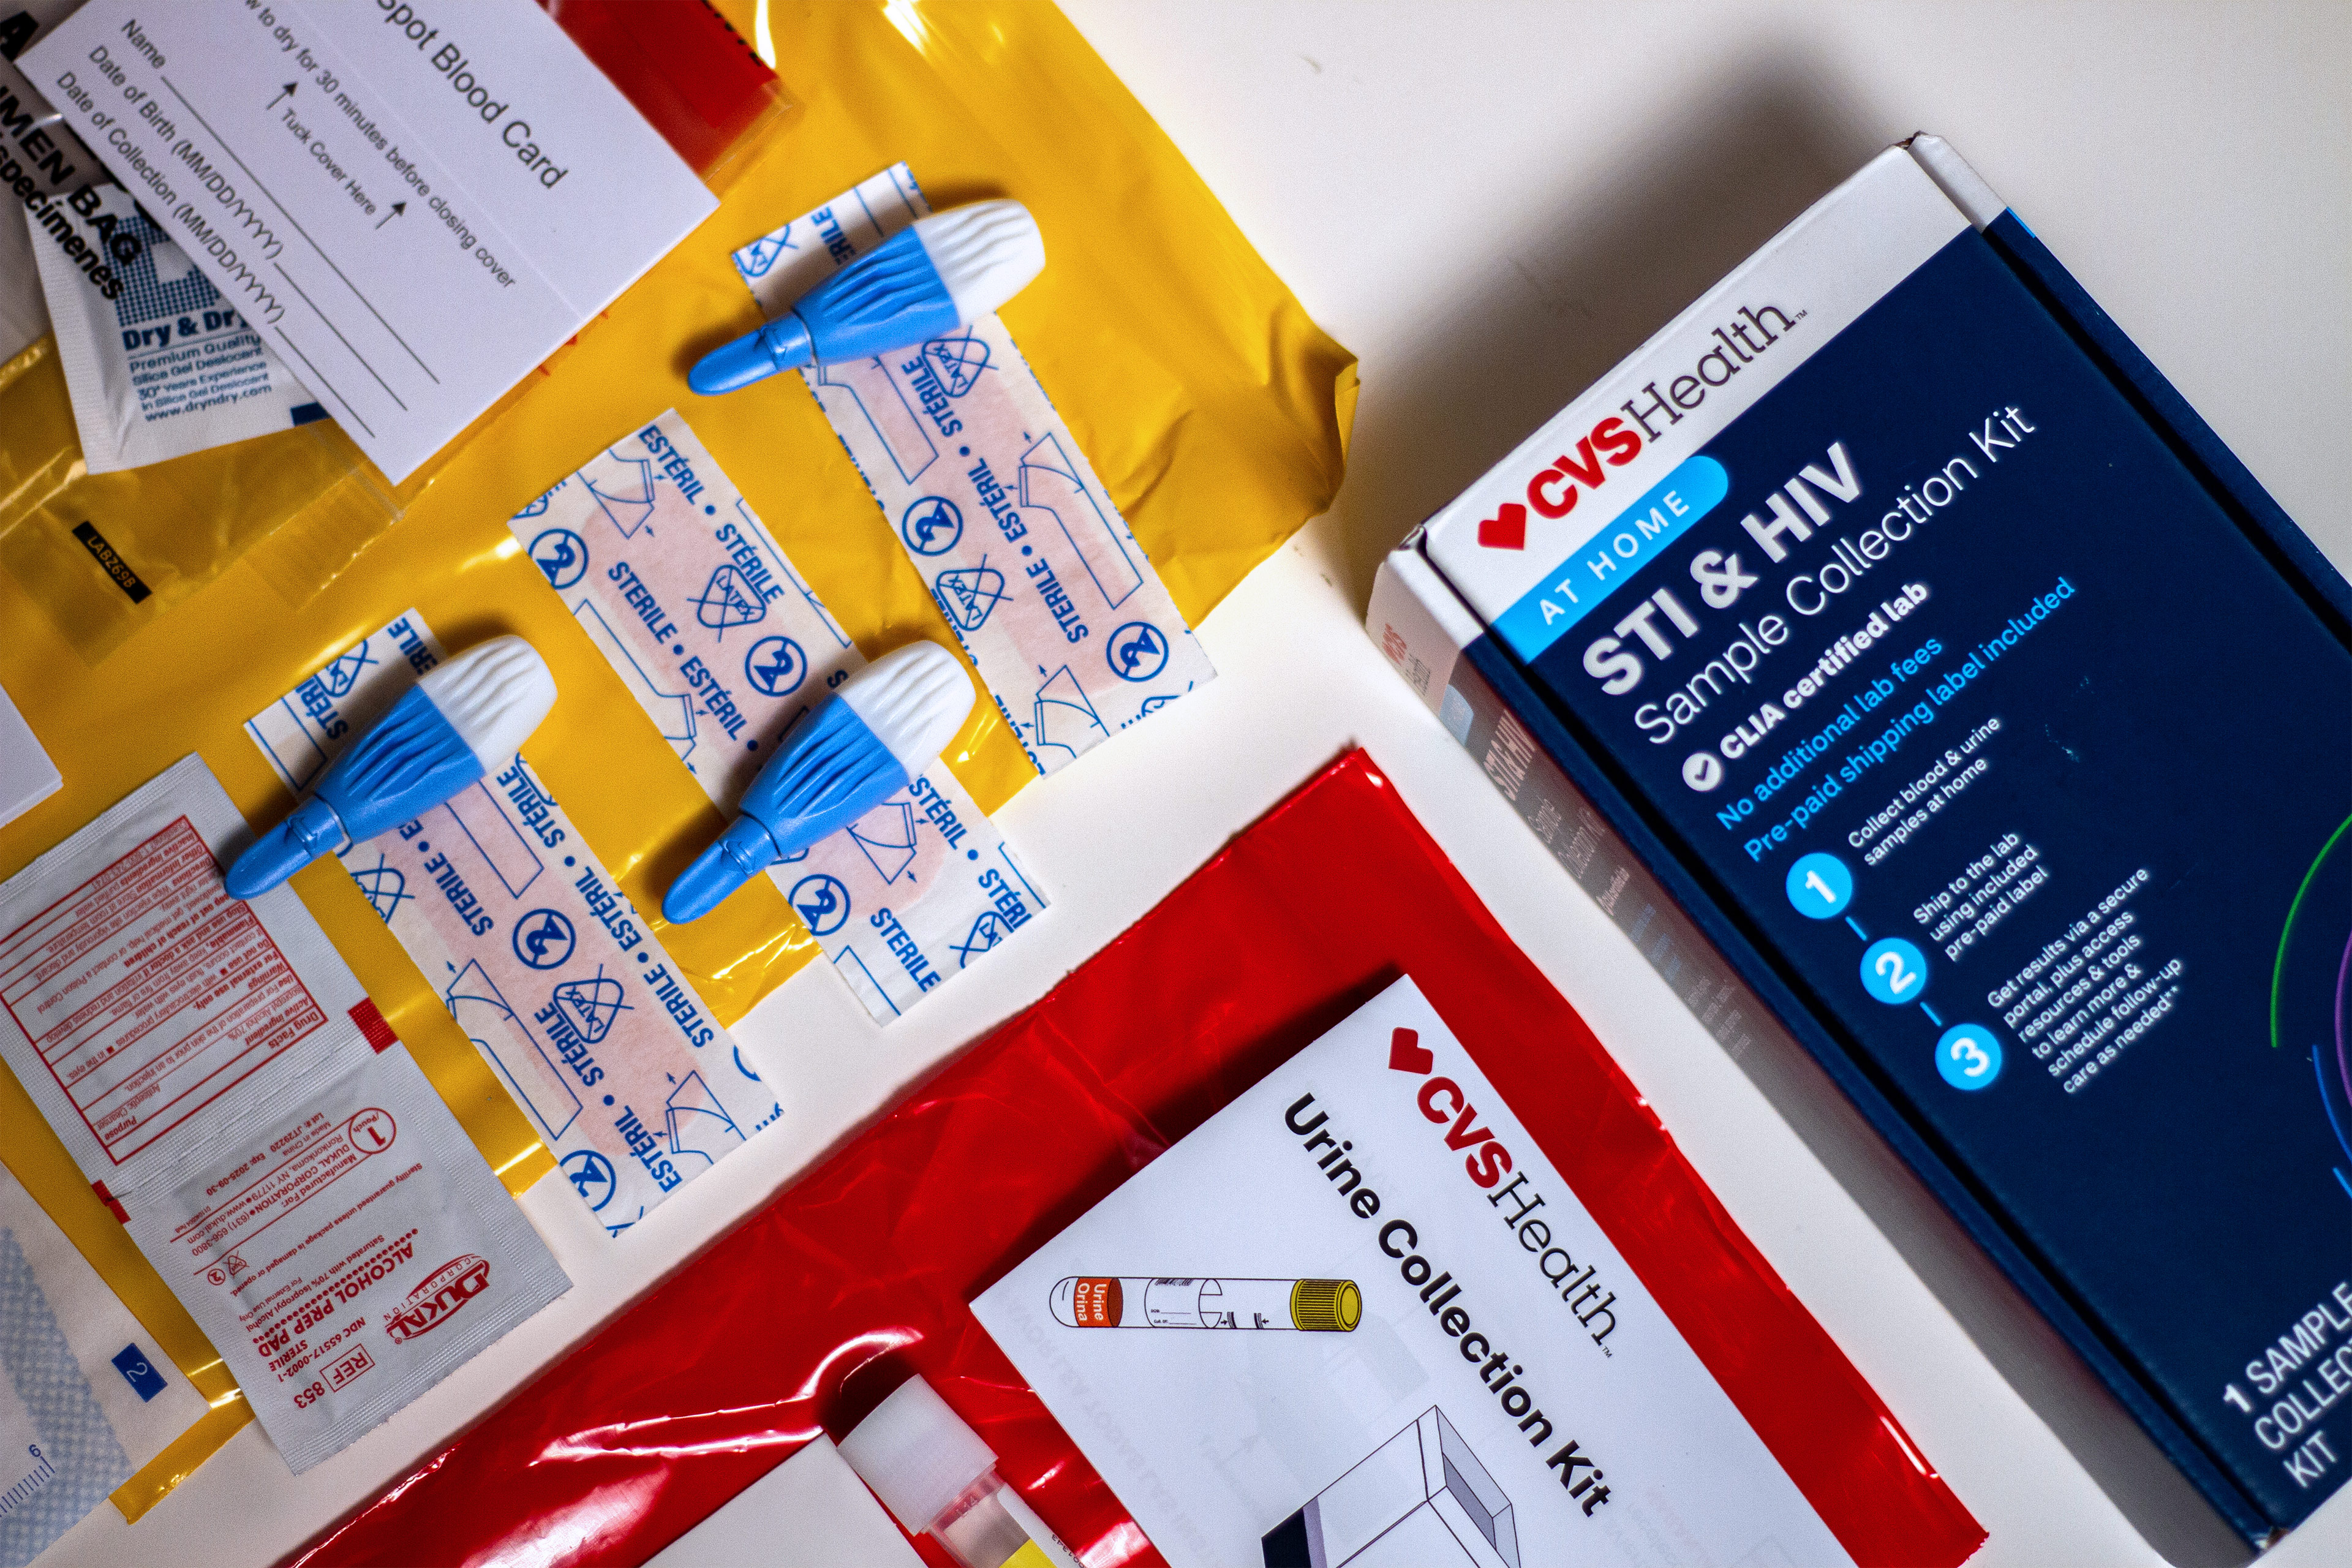 As STDs Proliferate, Companies Rush to Market At-Home Test Kits. But Are They Reliable?